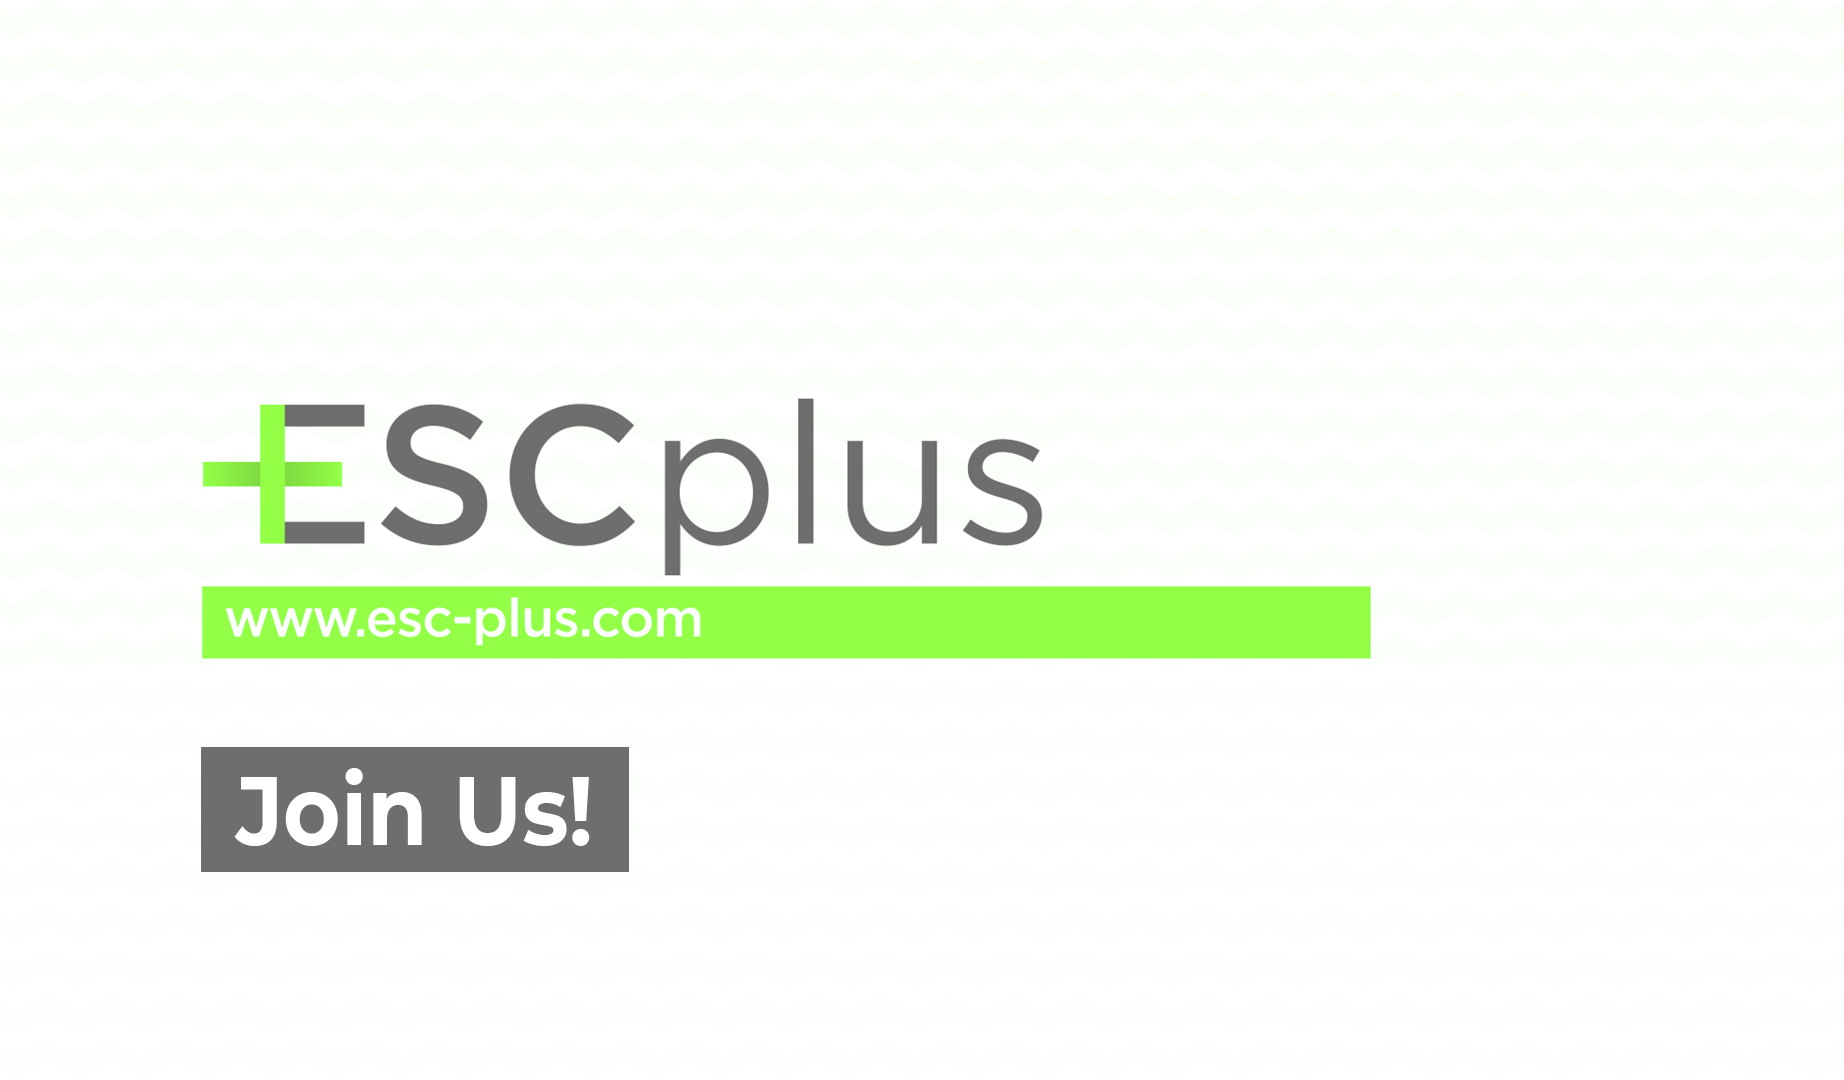 ESCplus is looking for you, be part of our team!